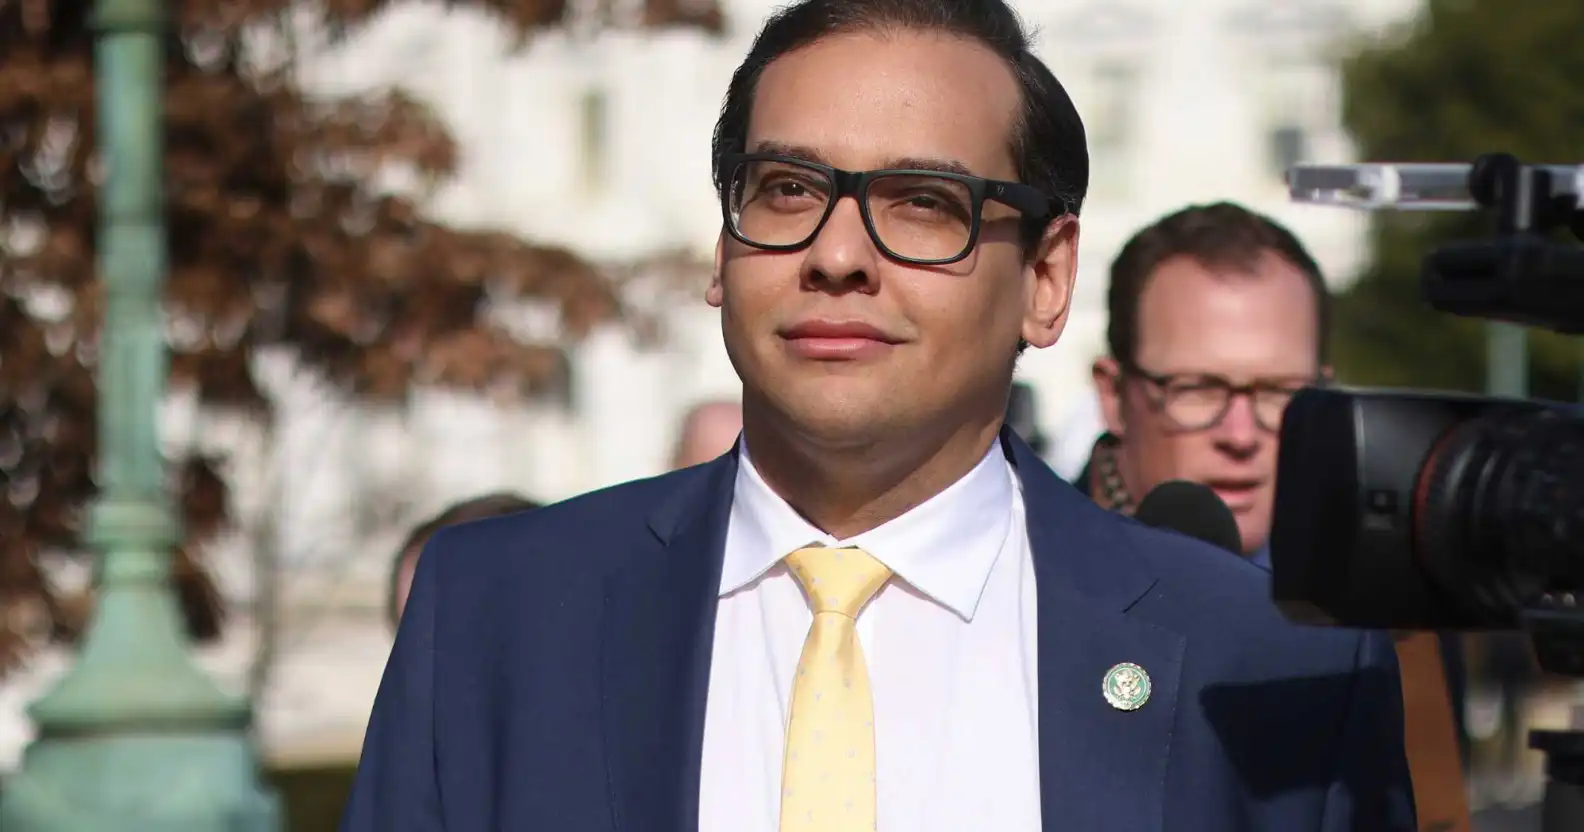 George Santos in a blue suit, white shirt and yellow tie